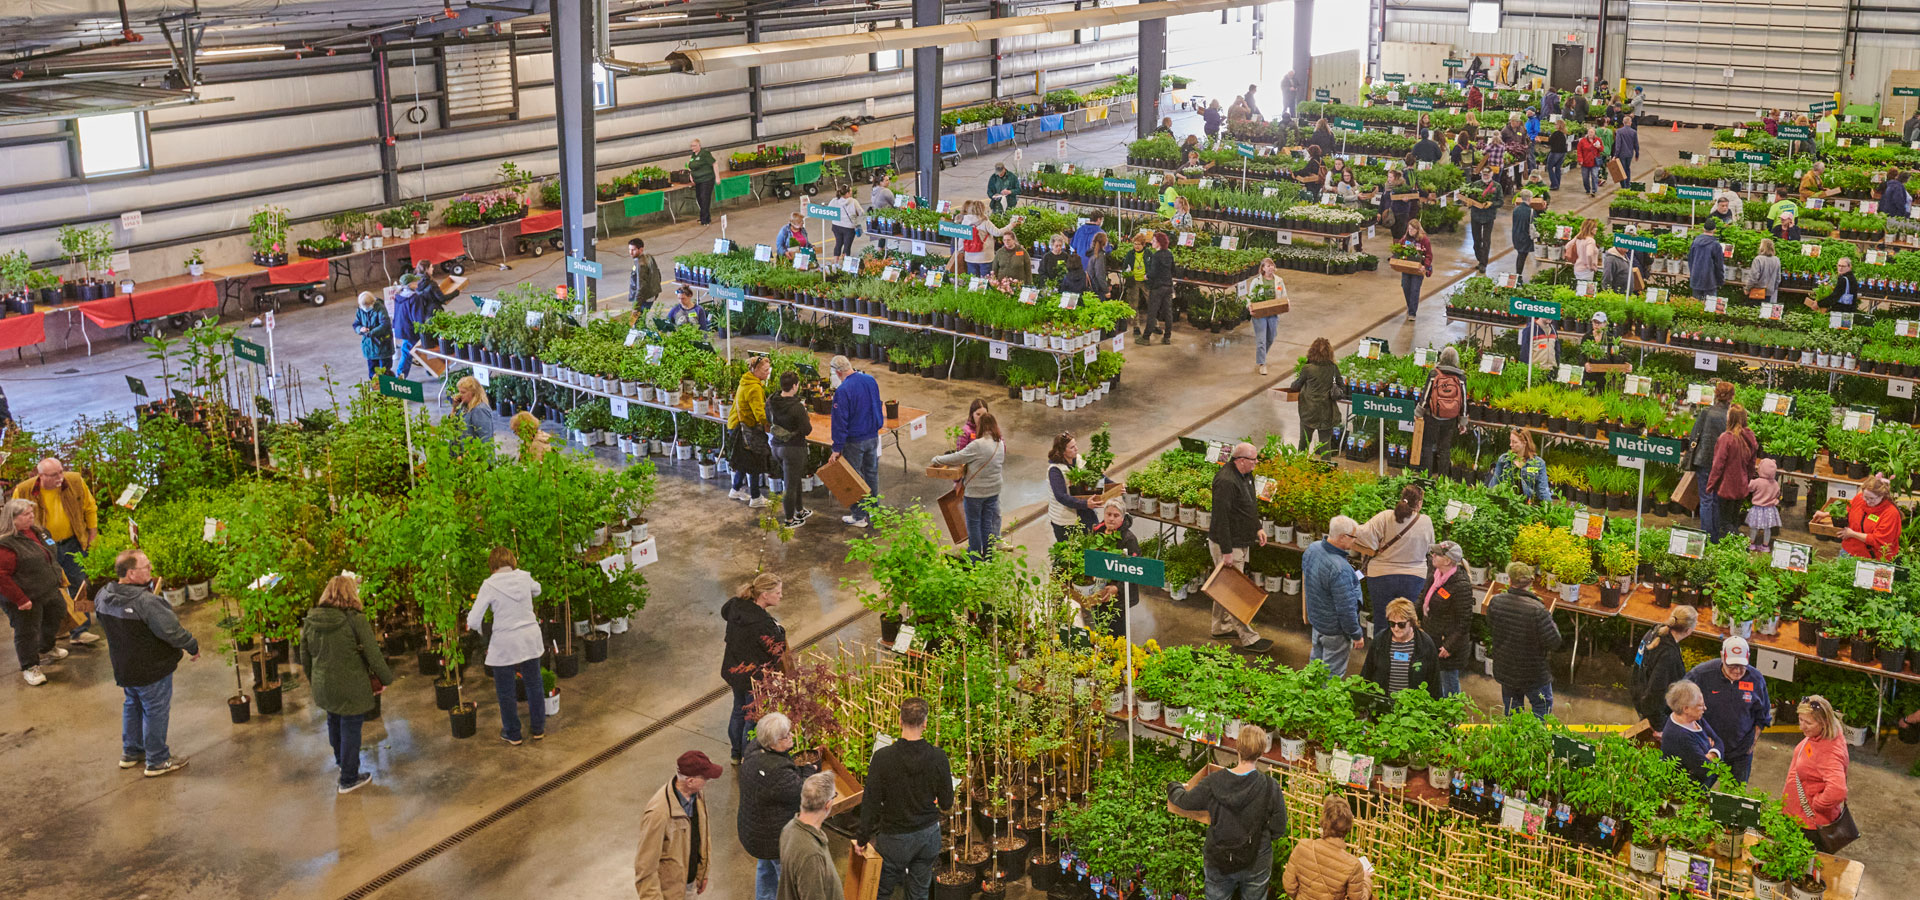 Arbor Day plant sale showing a vast array of options for spring plantings